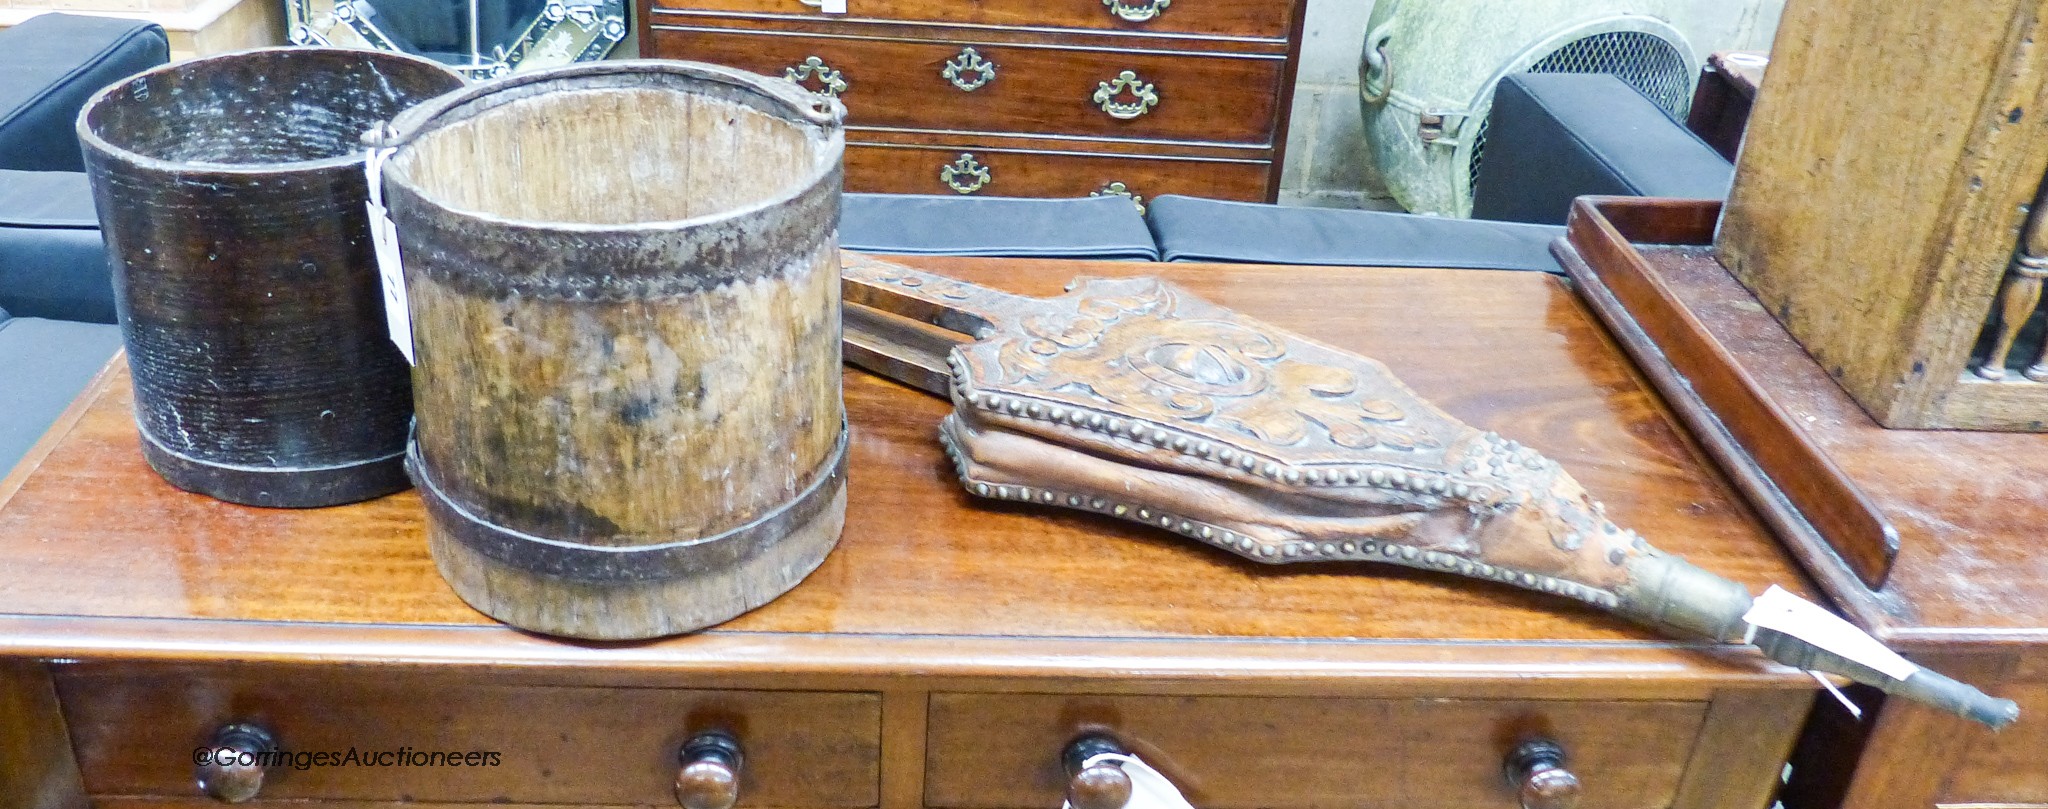 A 19th century coopered cast iron and ash bushel measure, a brass-bound ash gallon measure and a pair of Victorian oak and brass long-handled bellows                                                                       